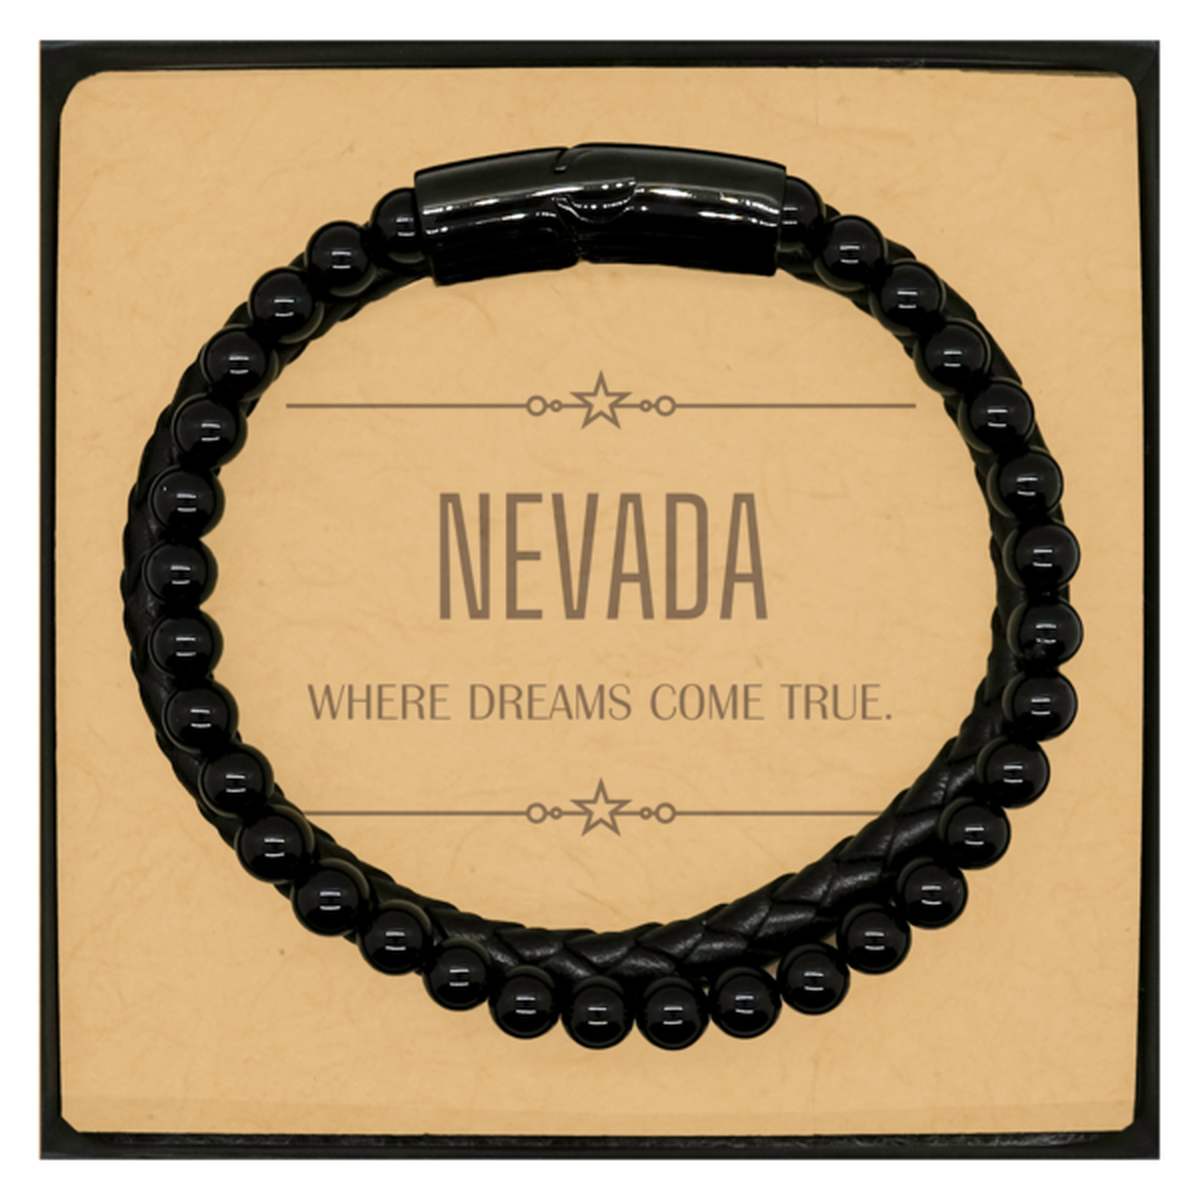 Love Nevada State Stone Leather Bracelets, Nevada Where dreams come true, Birthday Christmas Inspirational Gifts For Nevada Men, Women, Friends